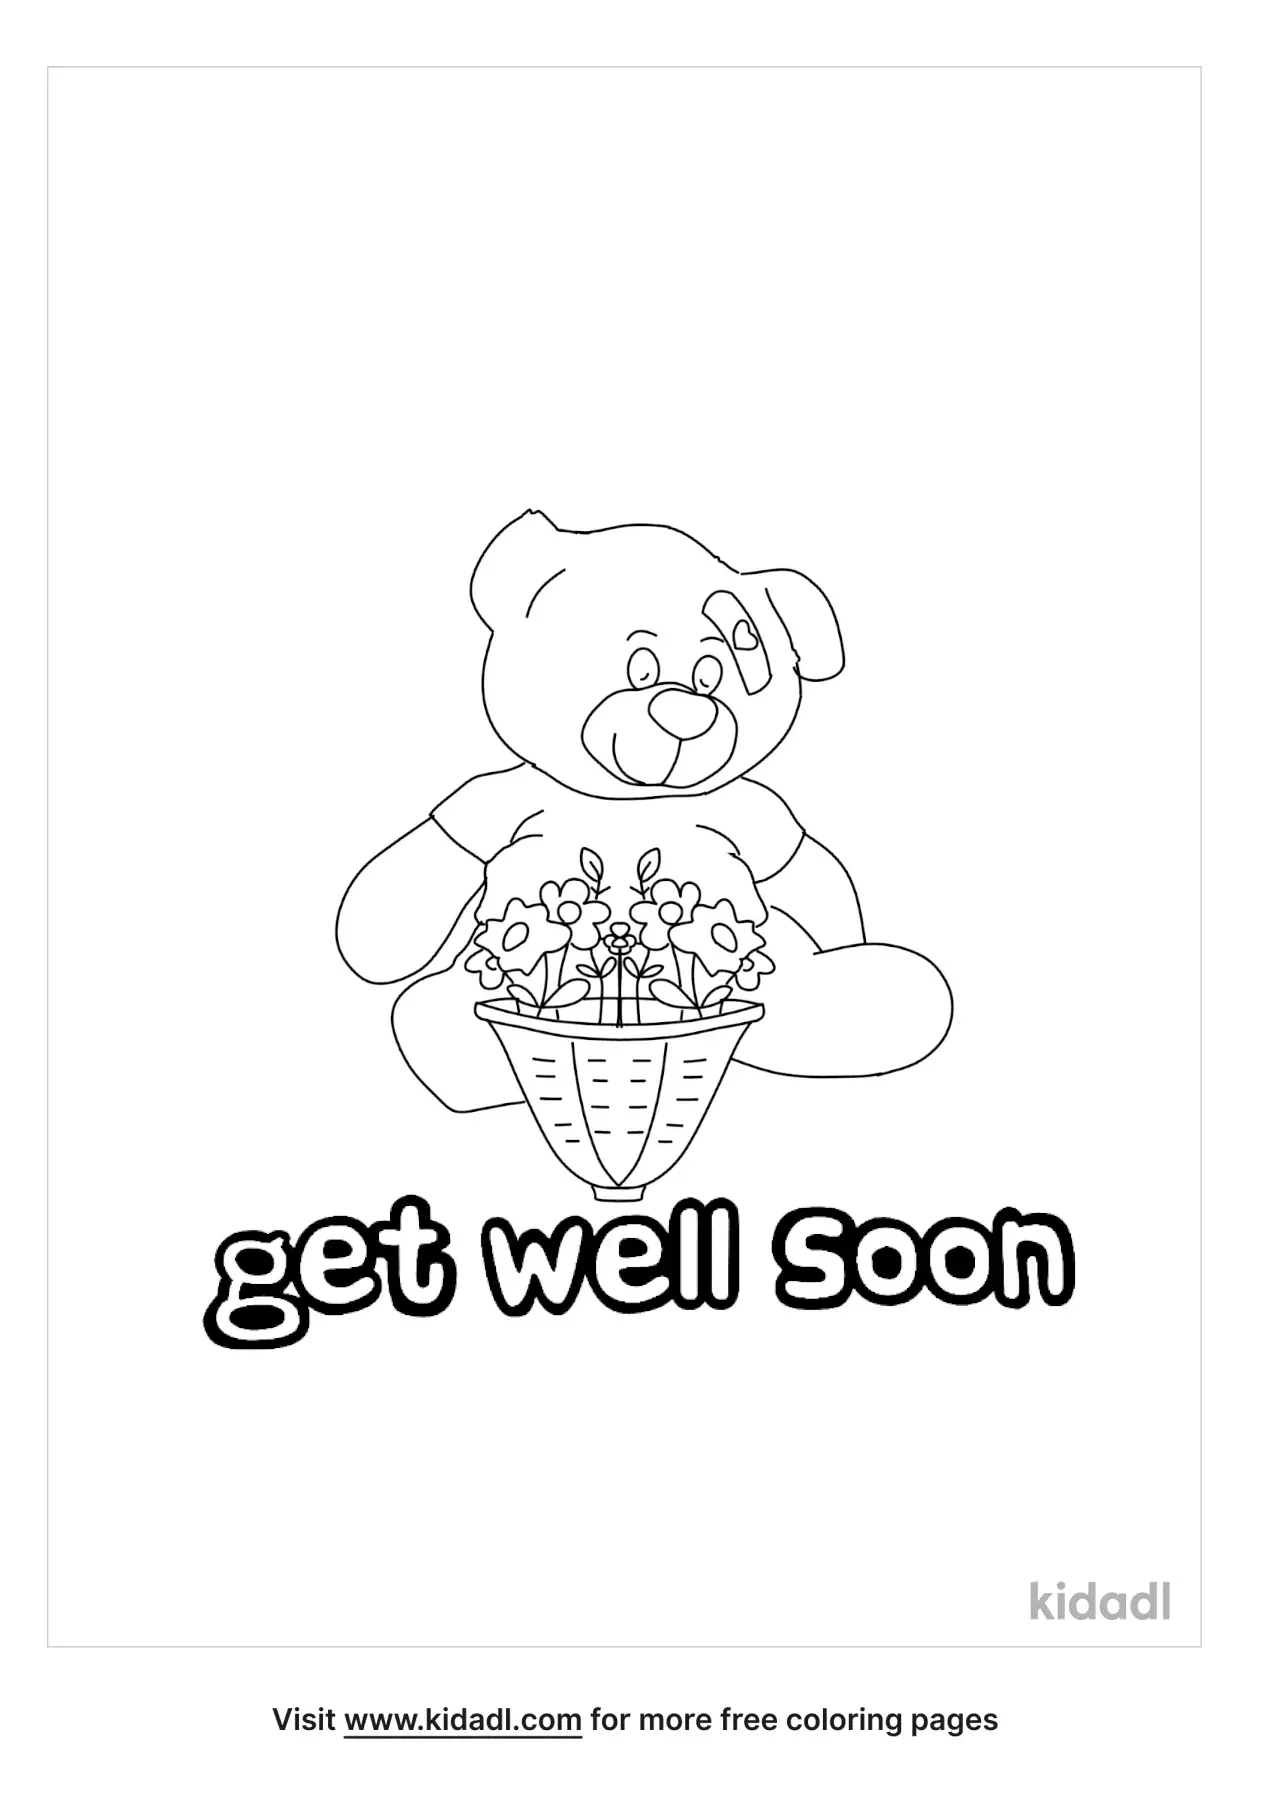 Free Get Well Card Coloring Page | Coloring Page Printables | Kidadl